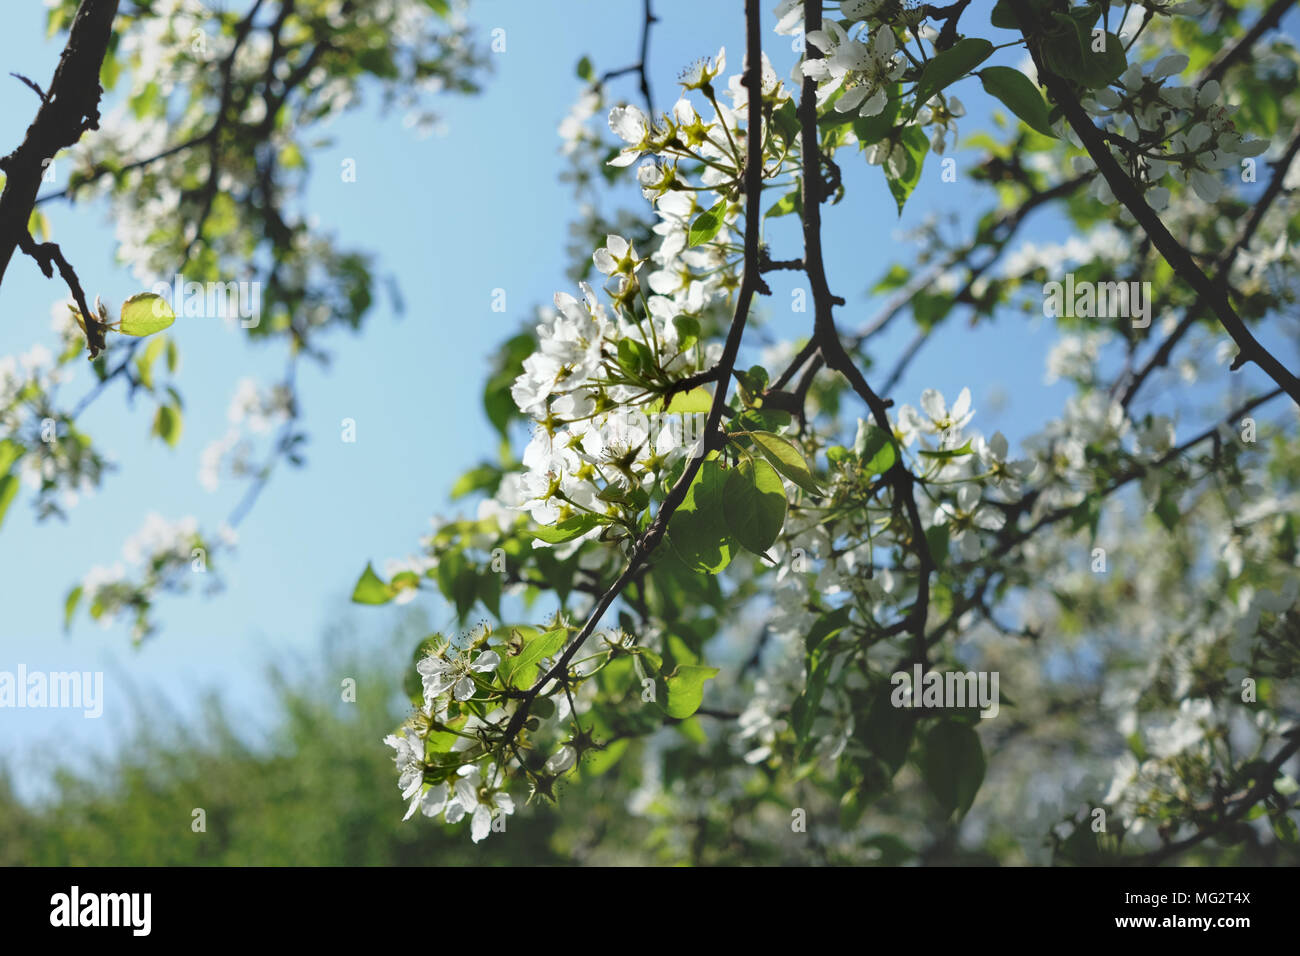 Blossoming tree branch with white flowers in a background of blue sky. Stock Photo